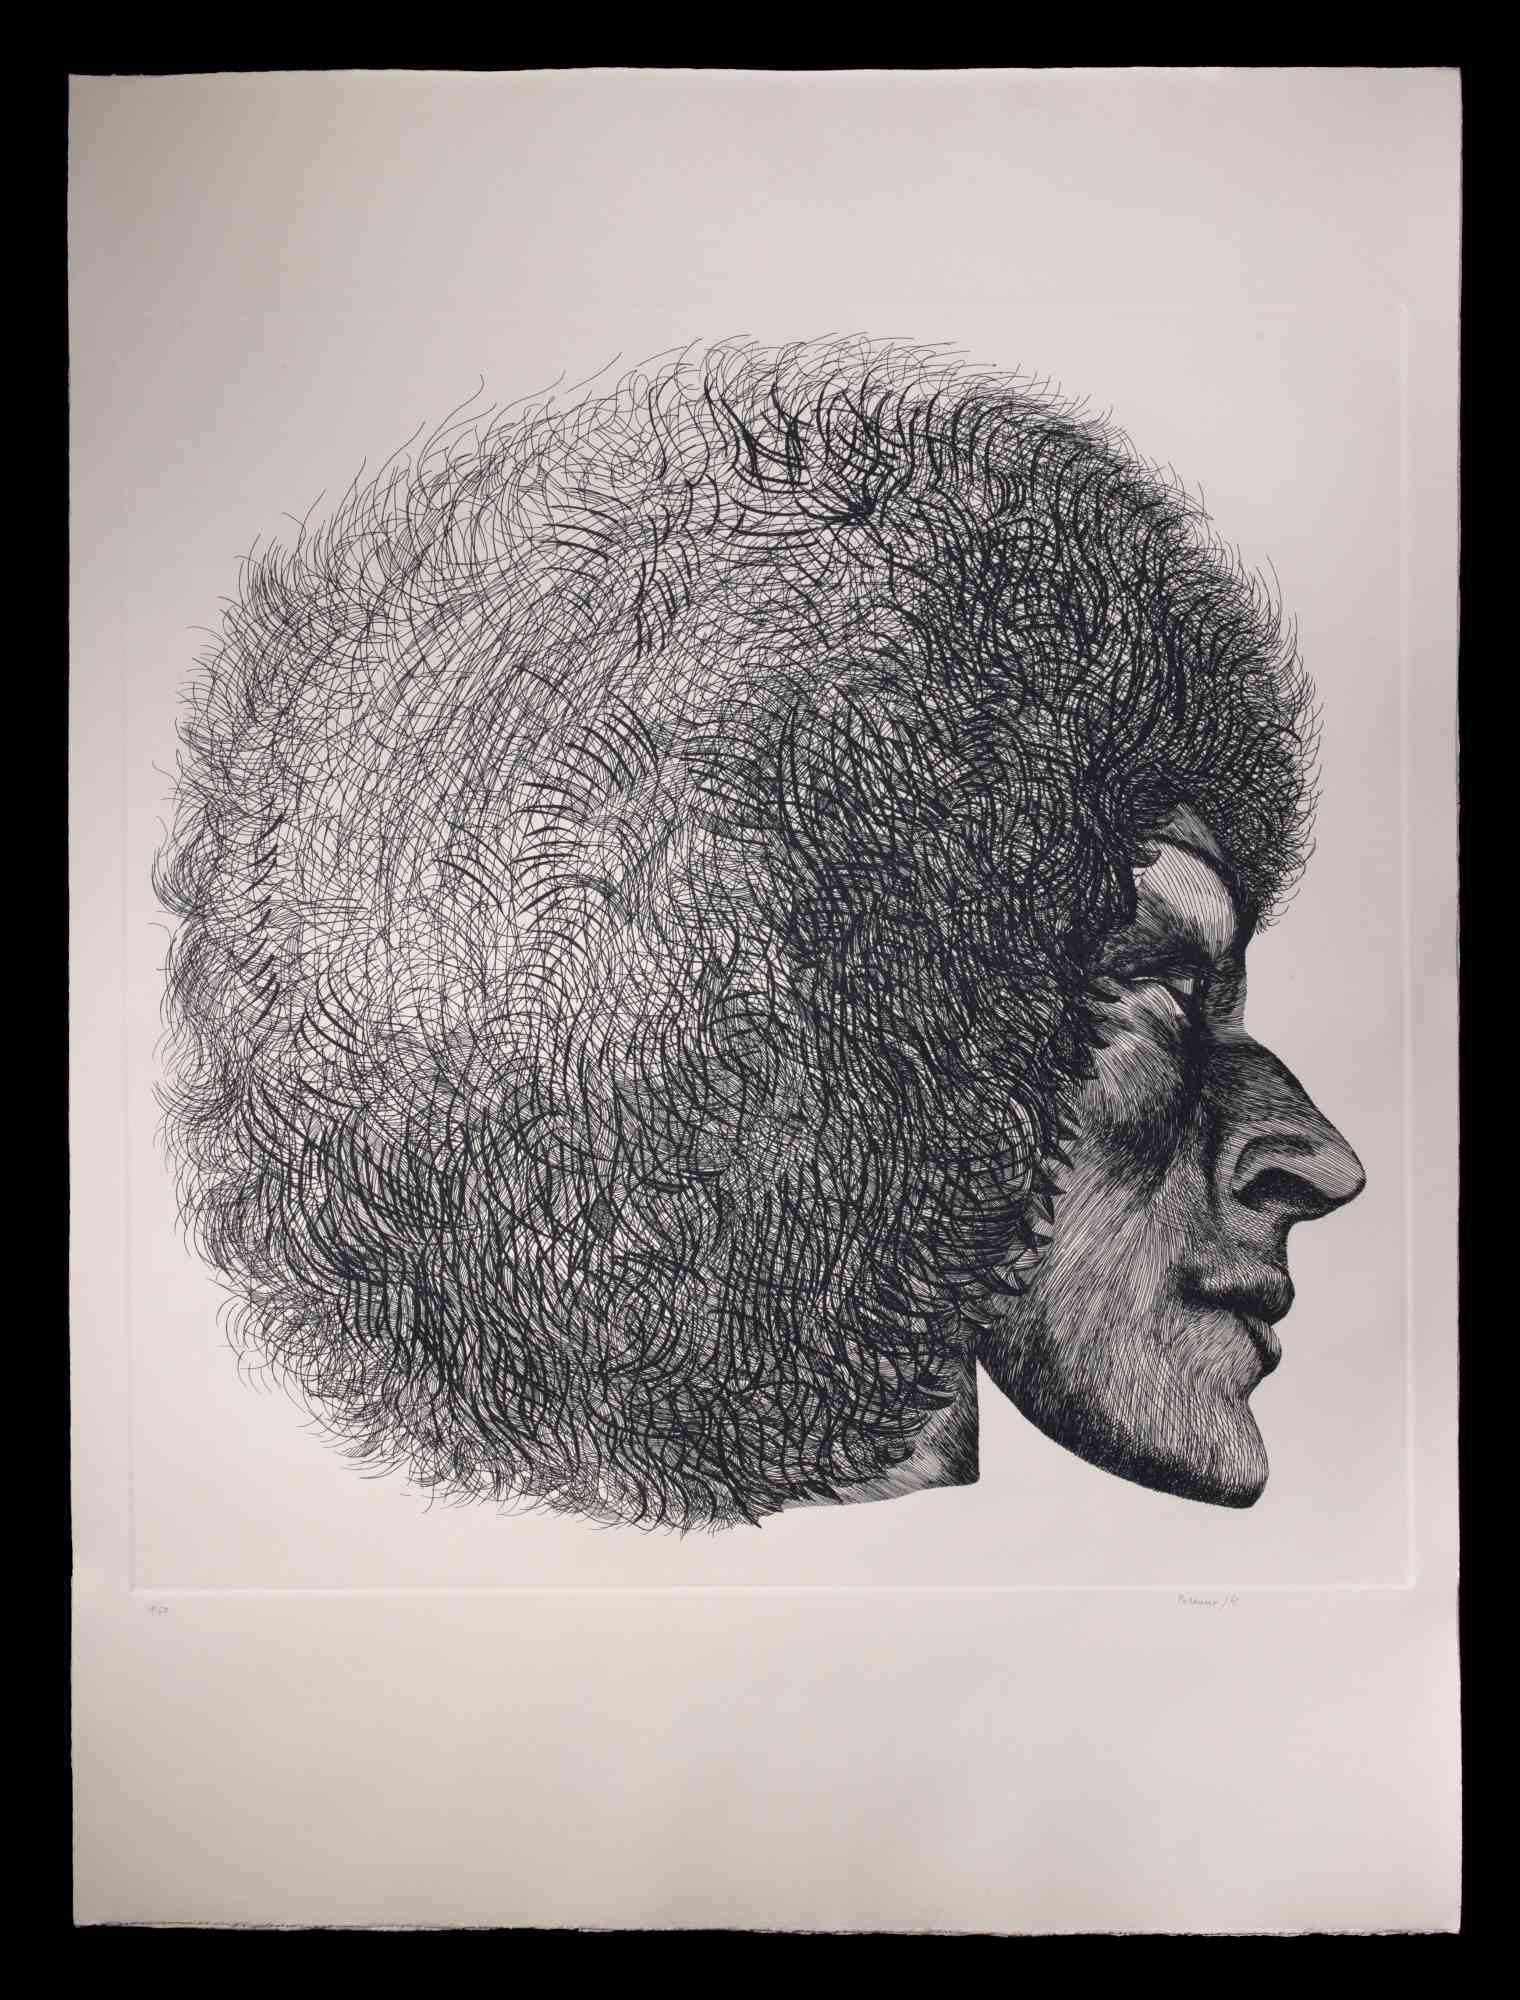 Profile is an original modern artowork realized by the Italian artist Giacomo Porzano (1925-2006) in 1972

Black and white etching.

Hand-signed and dated on the lower right.

Numbered on the lower left. Edition of 15/50.

Giacomo Porzano was born